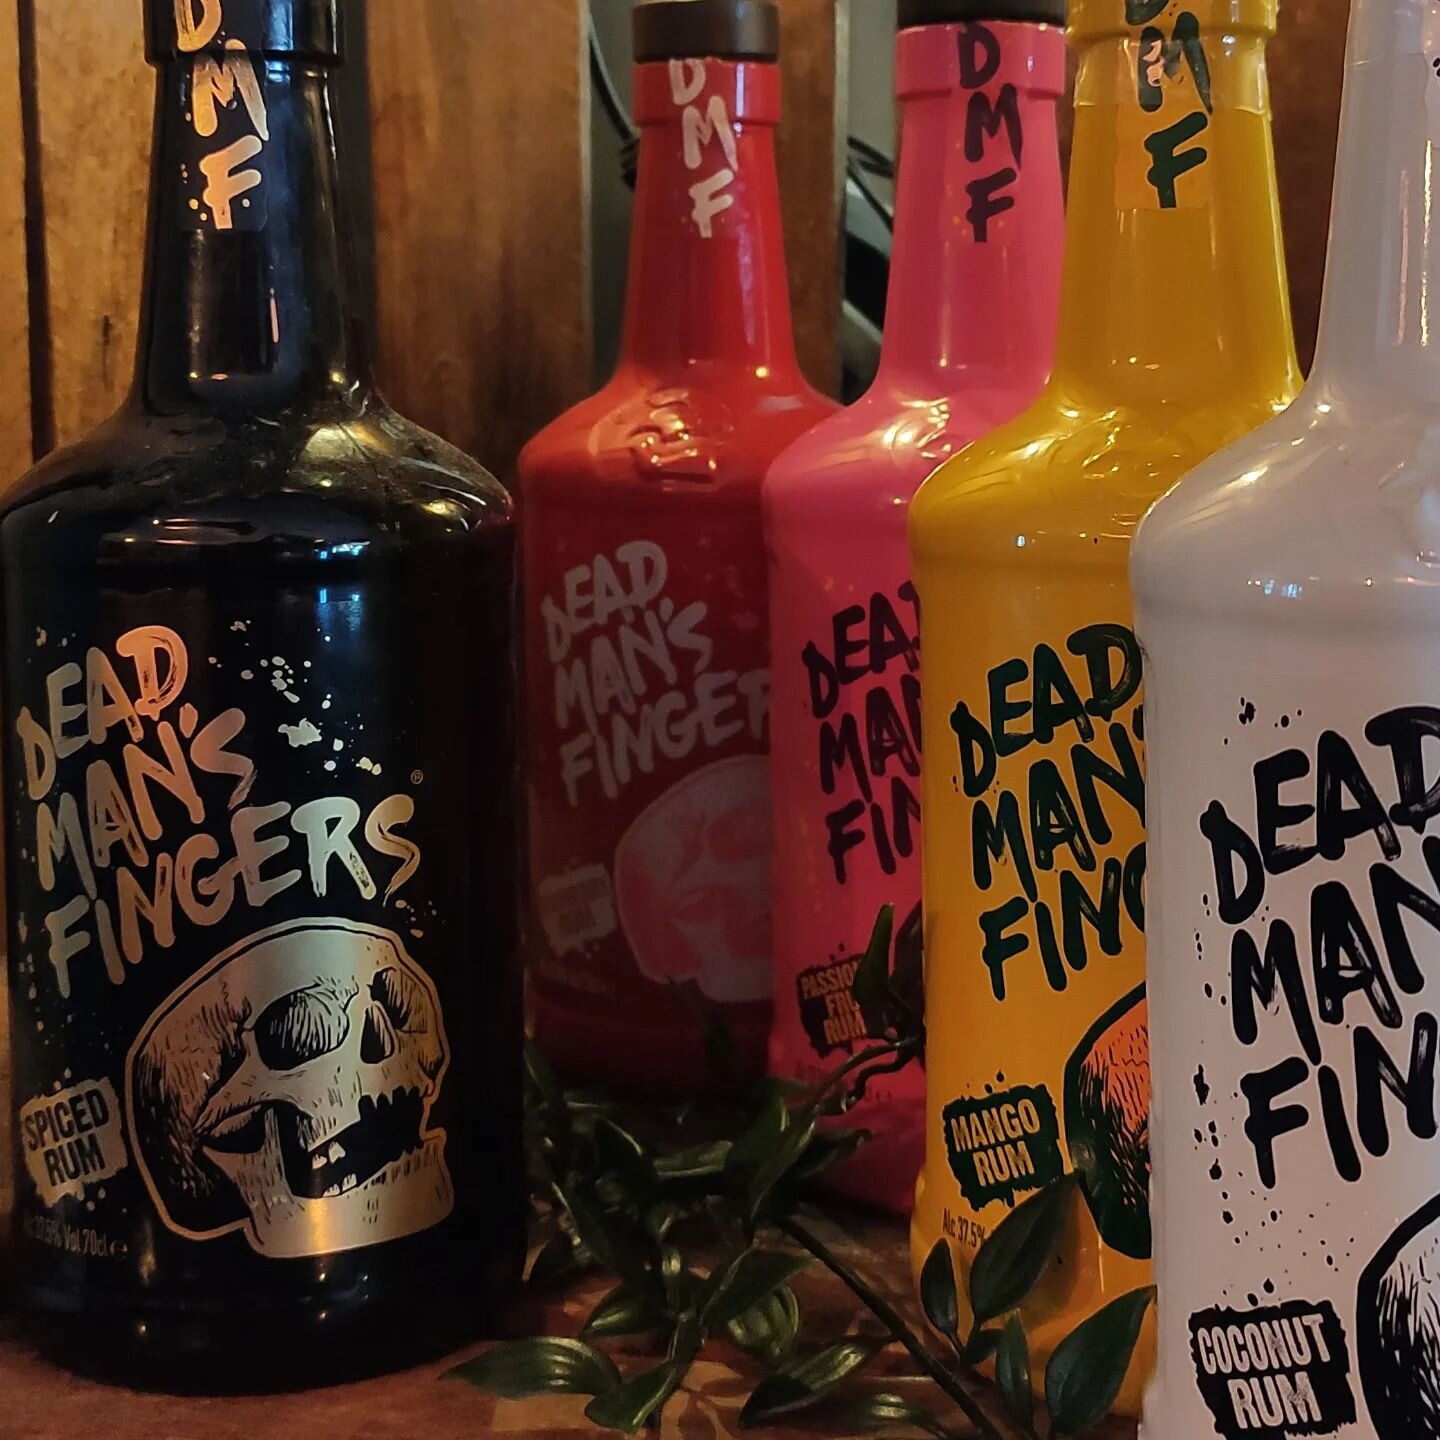 The collection keeps growing!

What flavour should we try next?

@deadmansfingers #rumoclock #rumcocktails #rum #deadmansfingers #rumlover